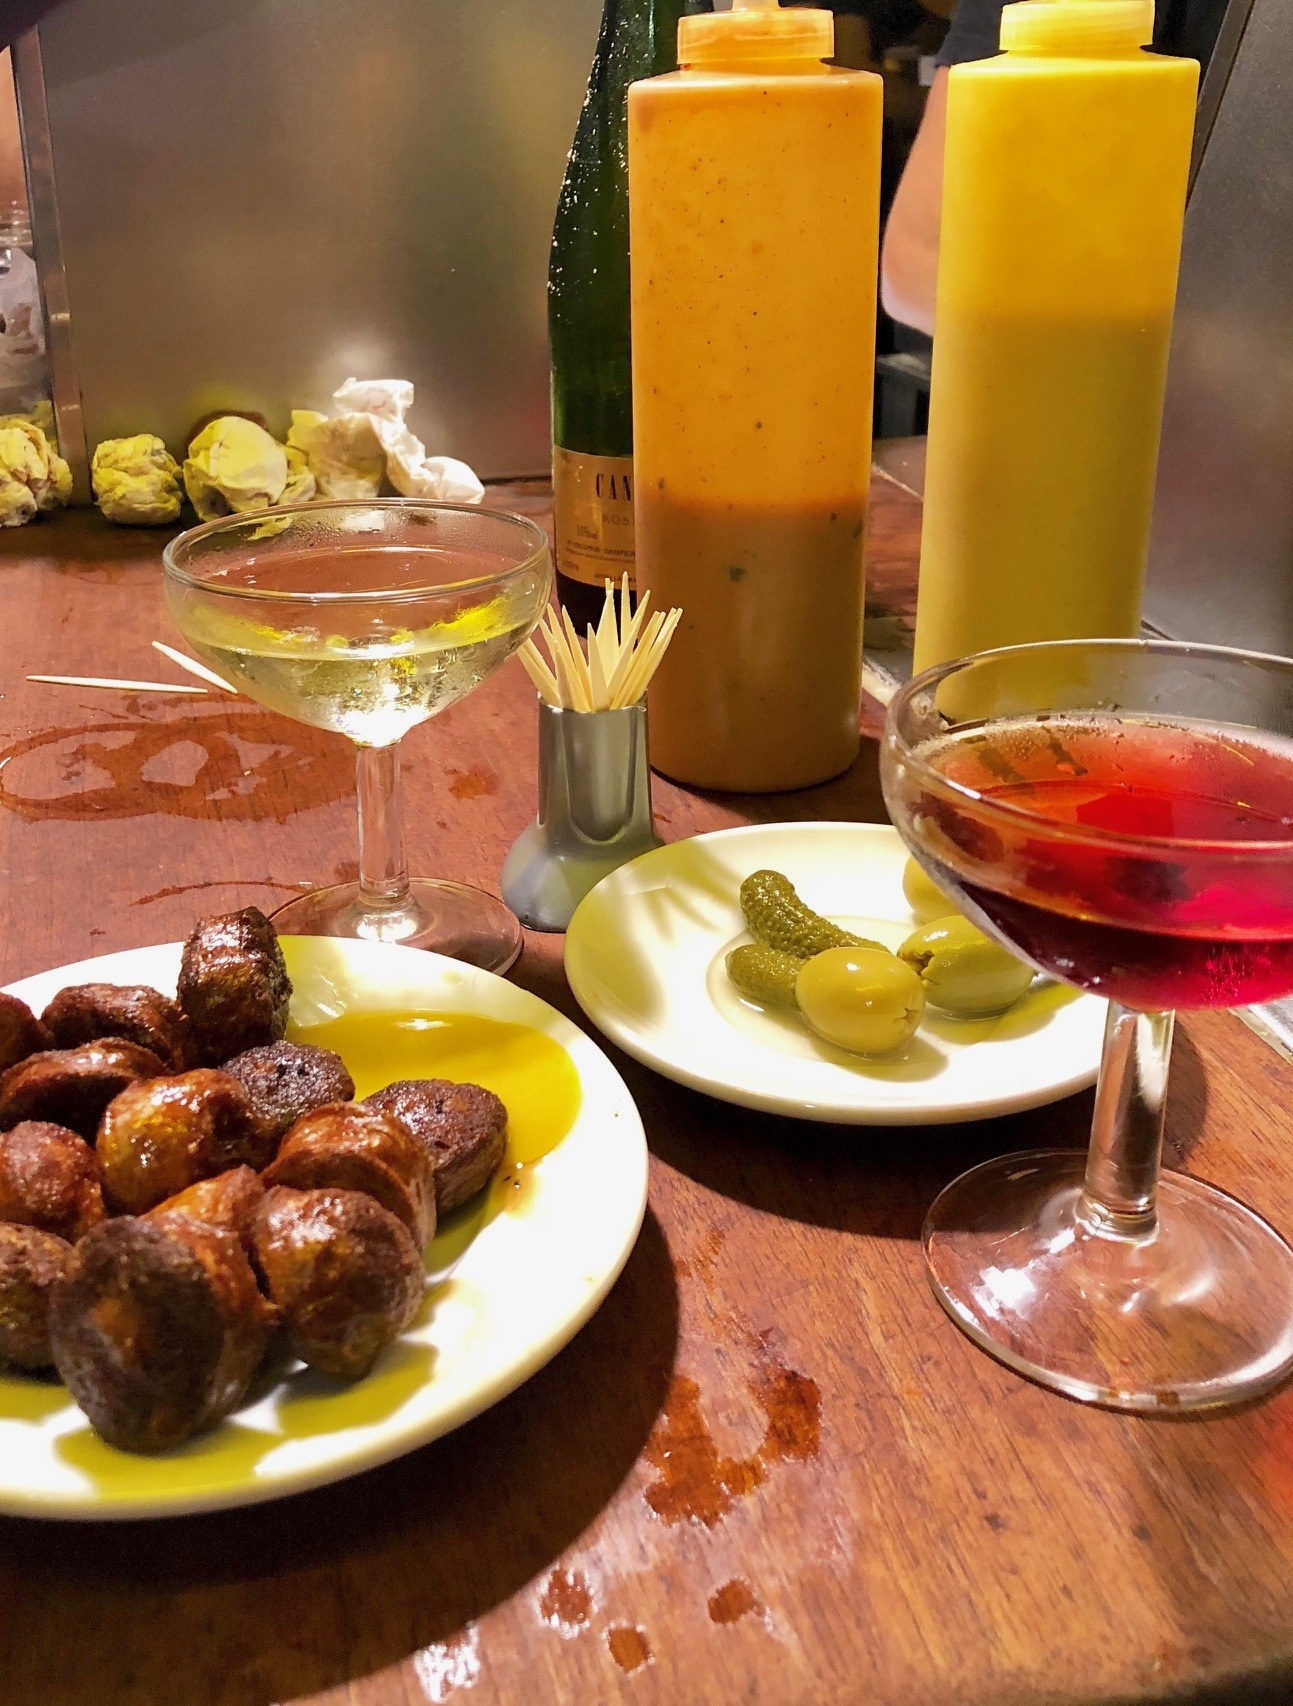 A plate of chorizo, olives, and glasses of sparkling wine